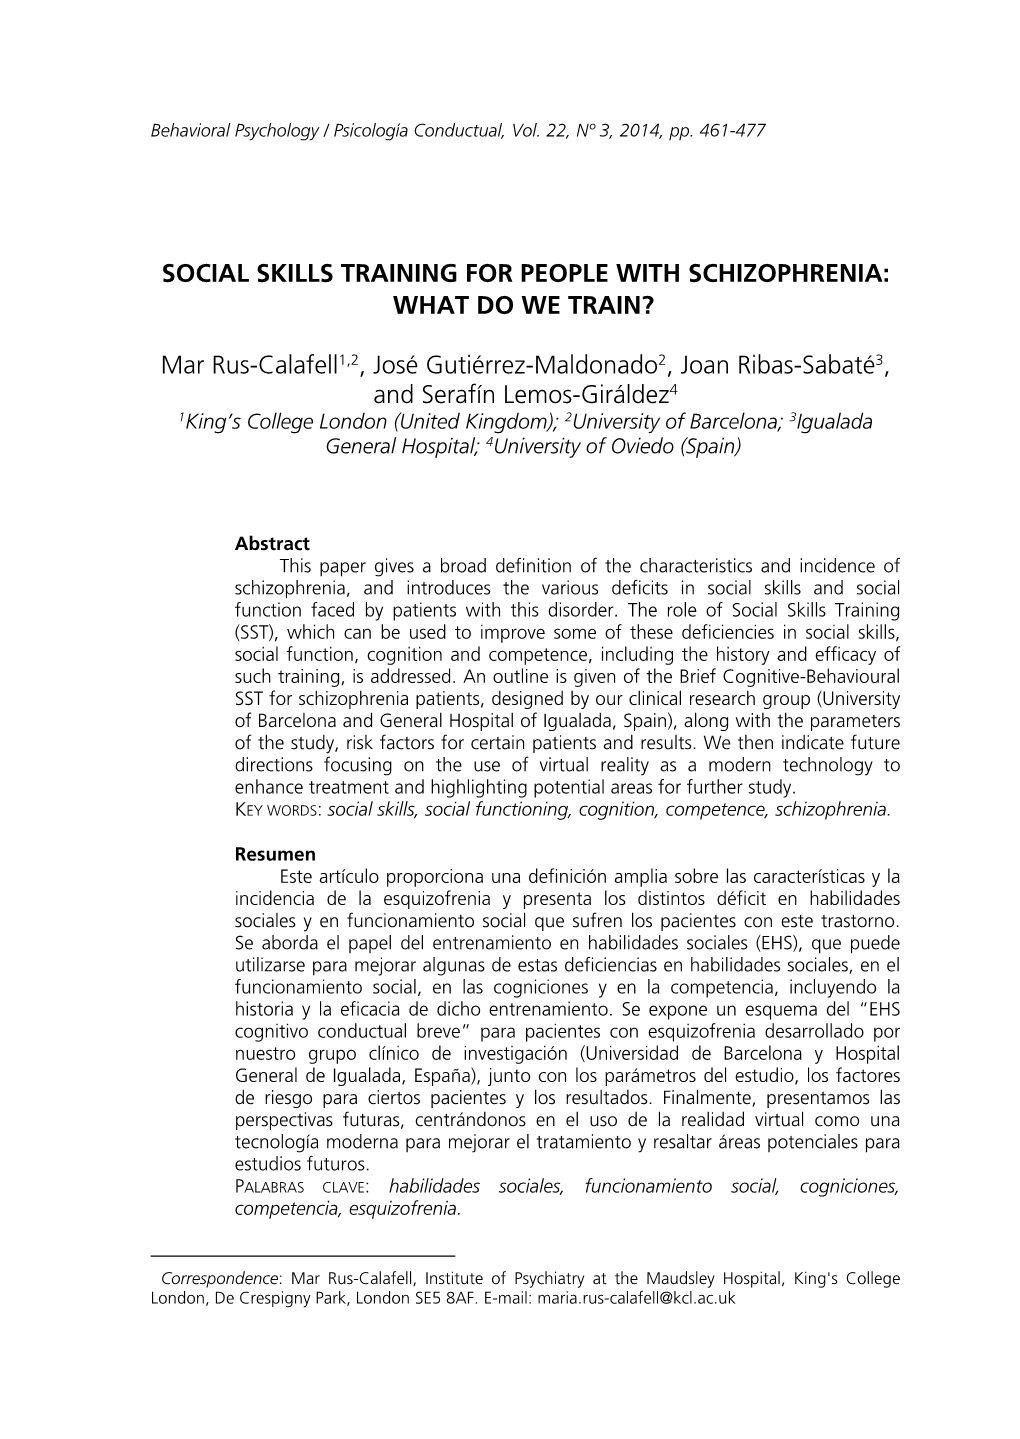 Social Skills Training for People with Schizophrenia: What Do We Train?